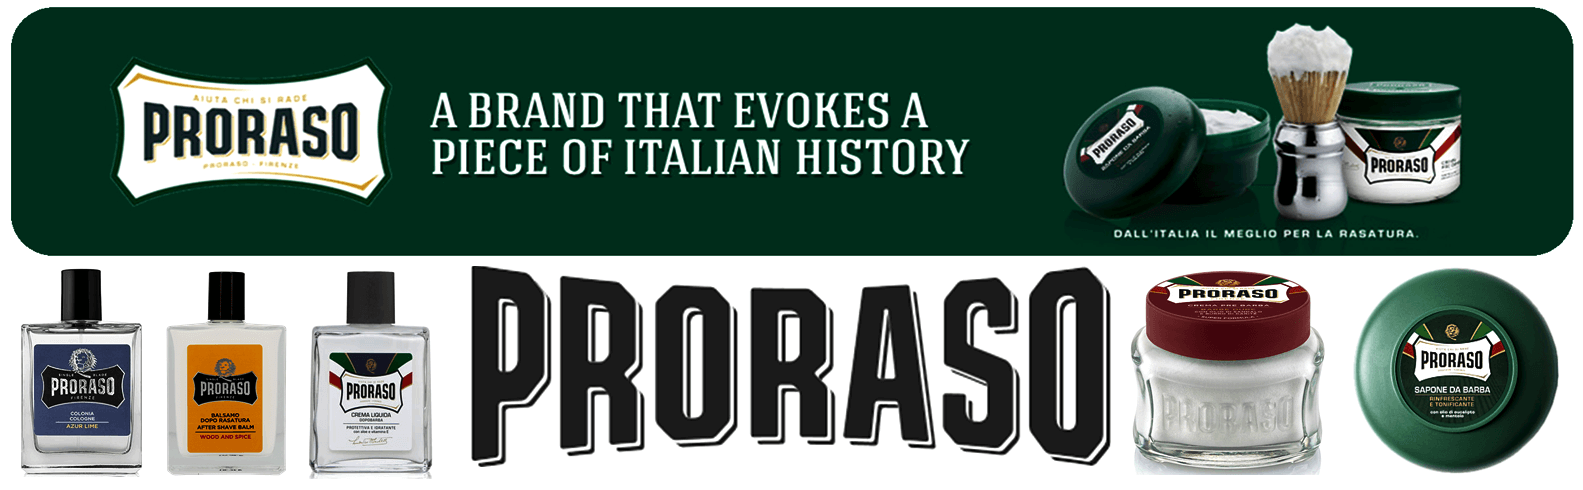 Proraso Products